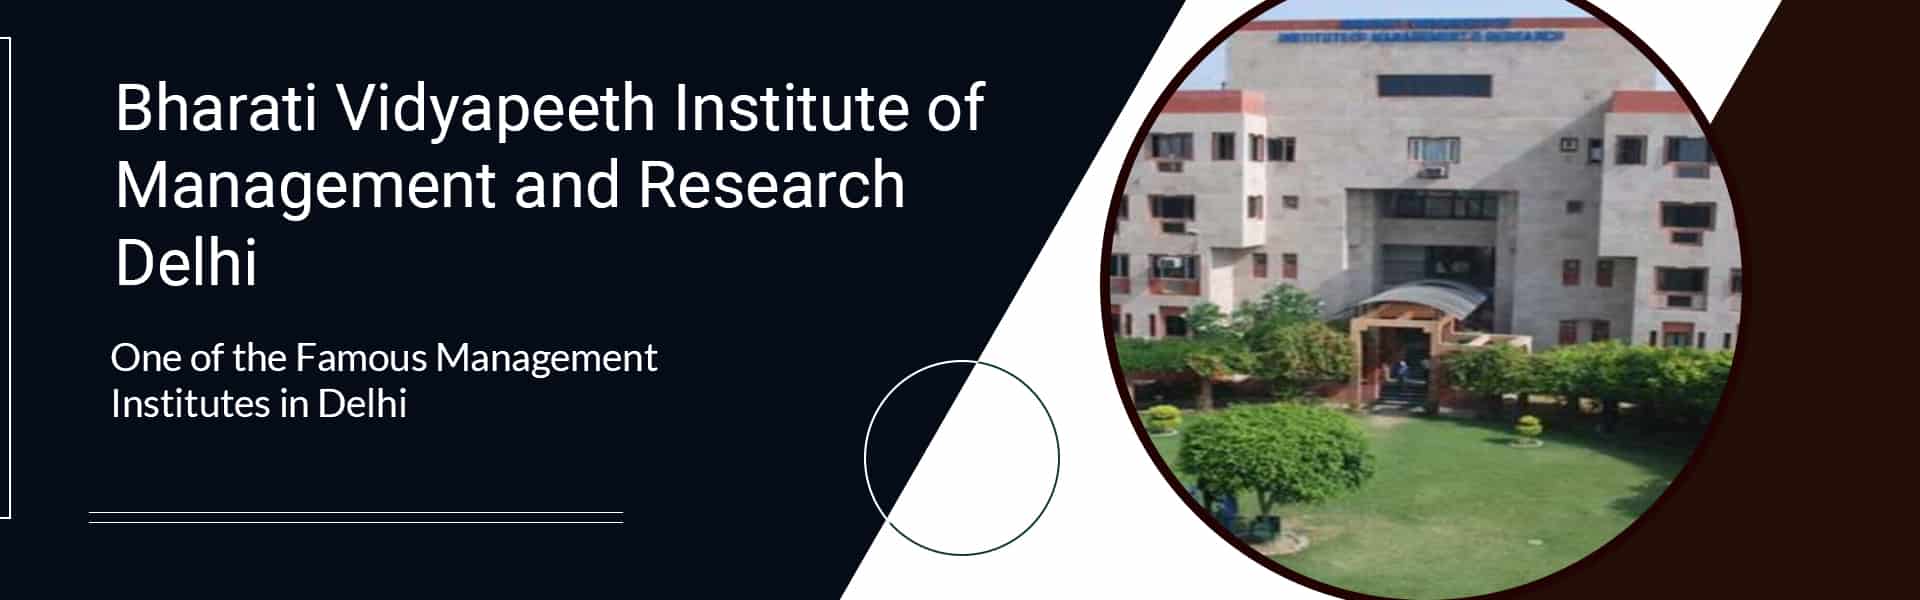  bharati vidyapeeth’s institute of management and research (bvimr), new delhi mba  admissions 2017